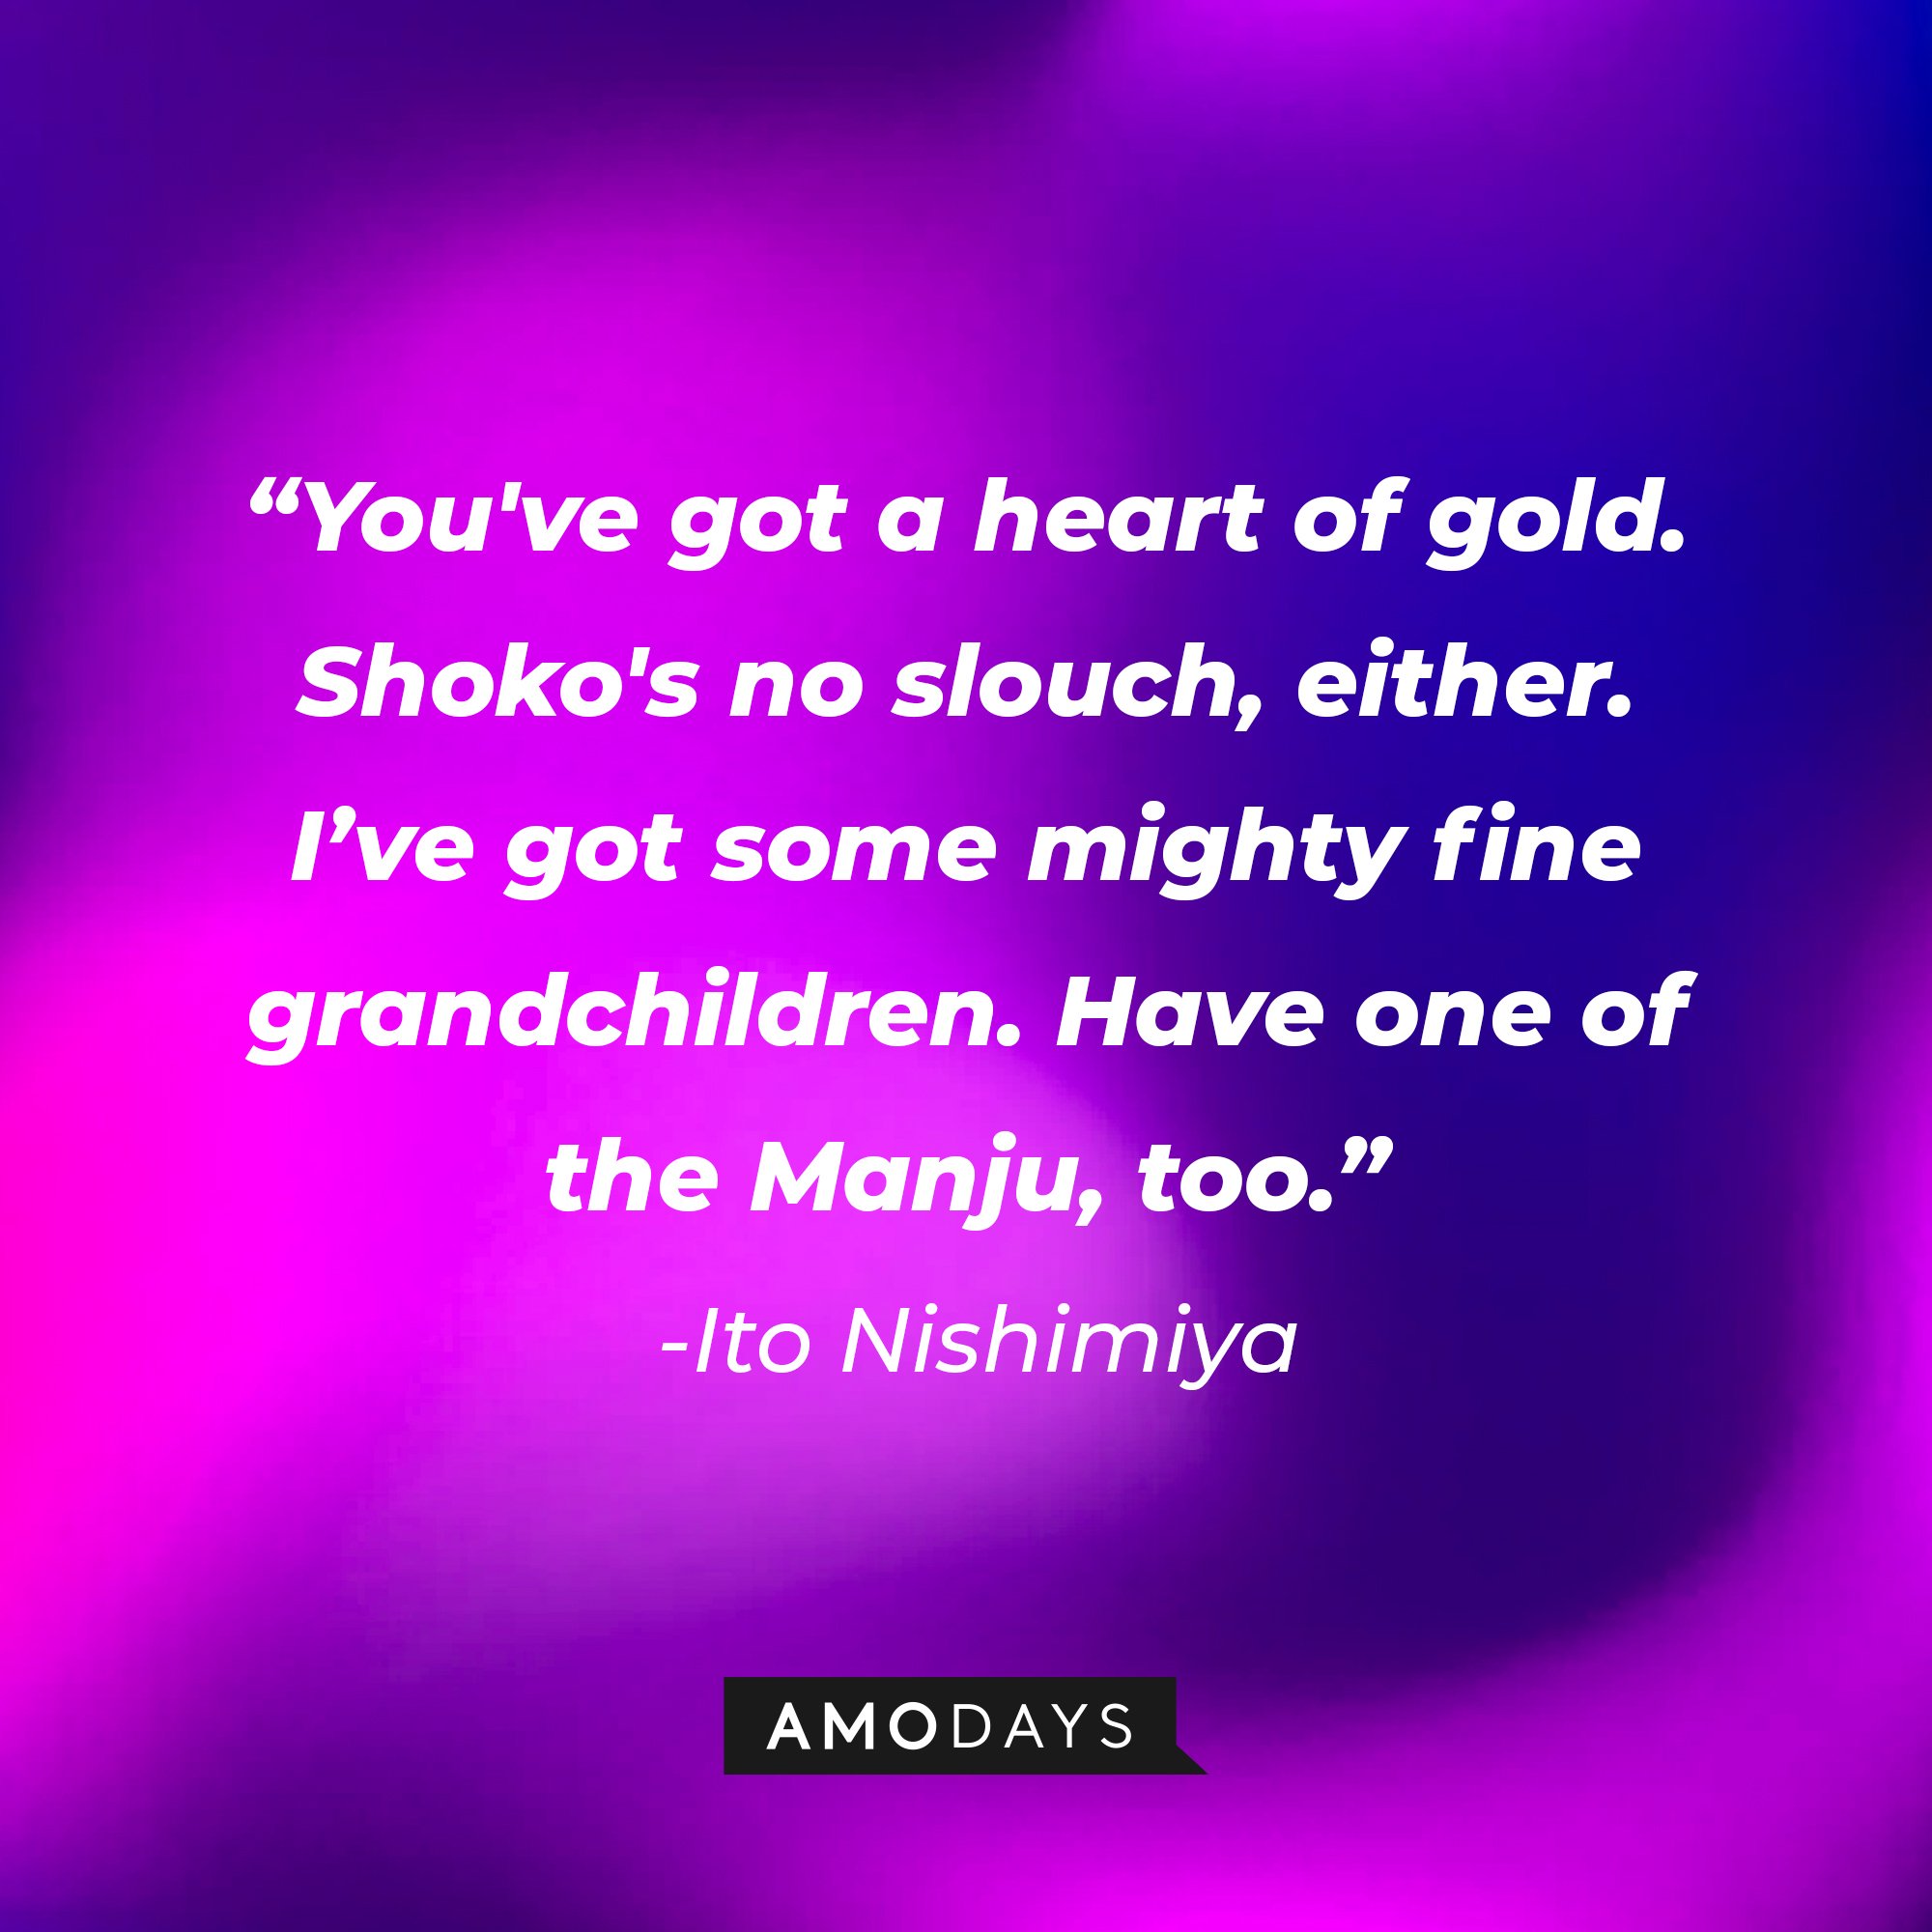 Ito Nishimiya’s quote: "You've got a heart of gold. Shoko's no slouch, either. I’ve got some mighty fine grandchildren. Have one of the Manju, too.” | Image: AmoDays    